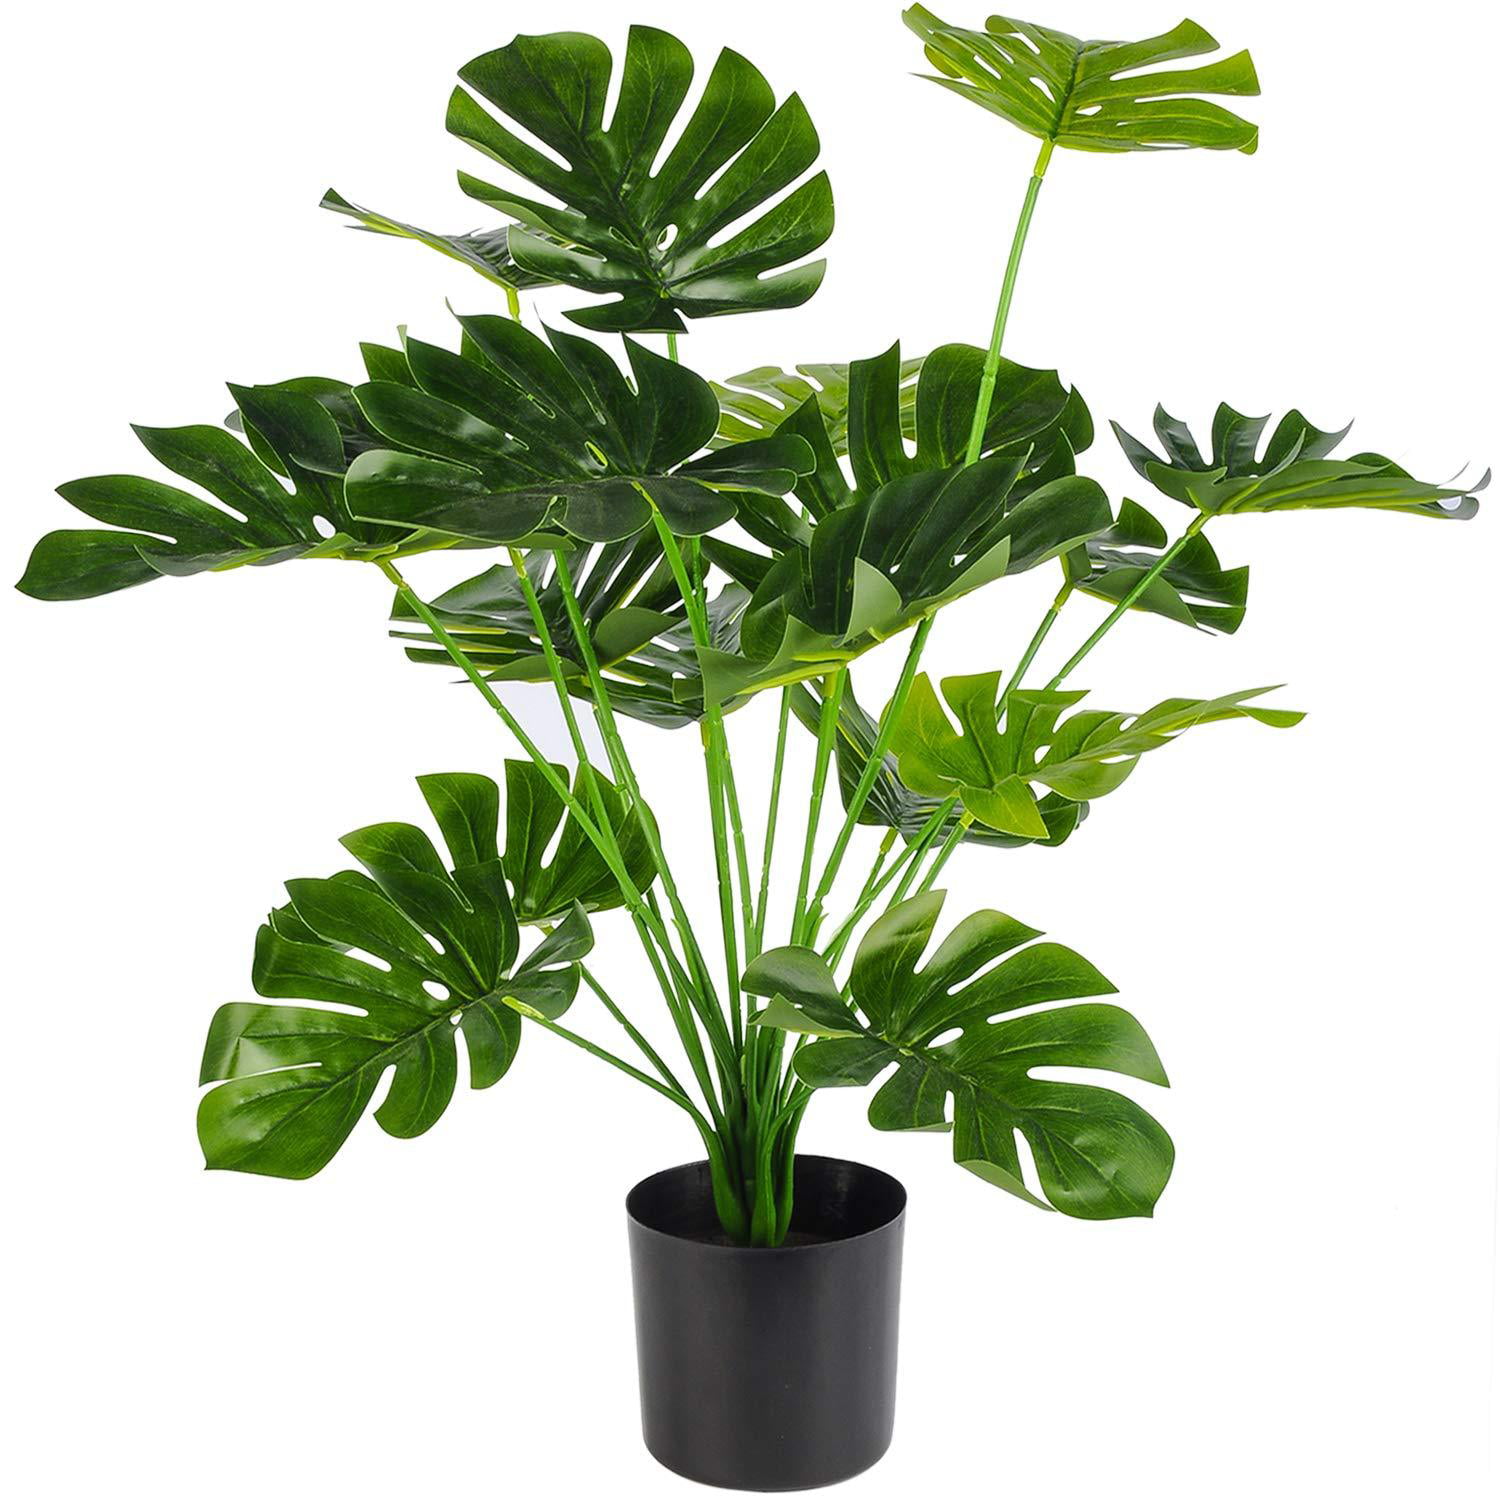 Artificial Plant Tree Flower Pot Ivy Outdoor Fake Large Medium Small Home Decor 